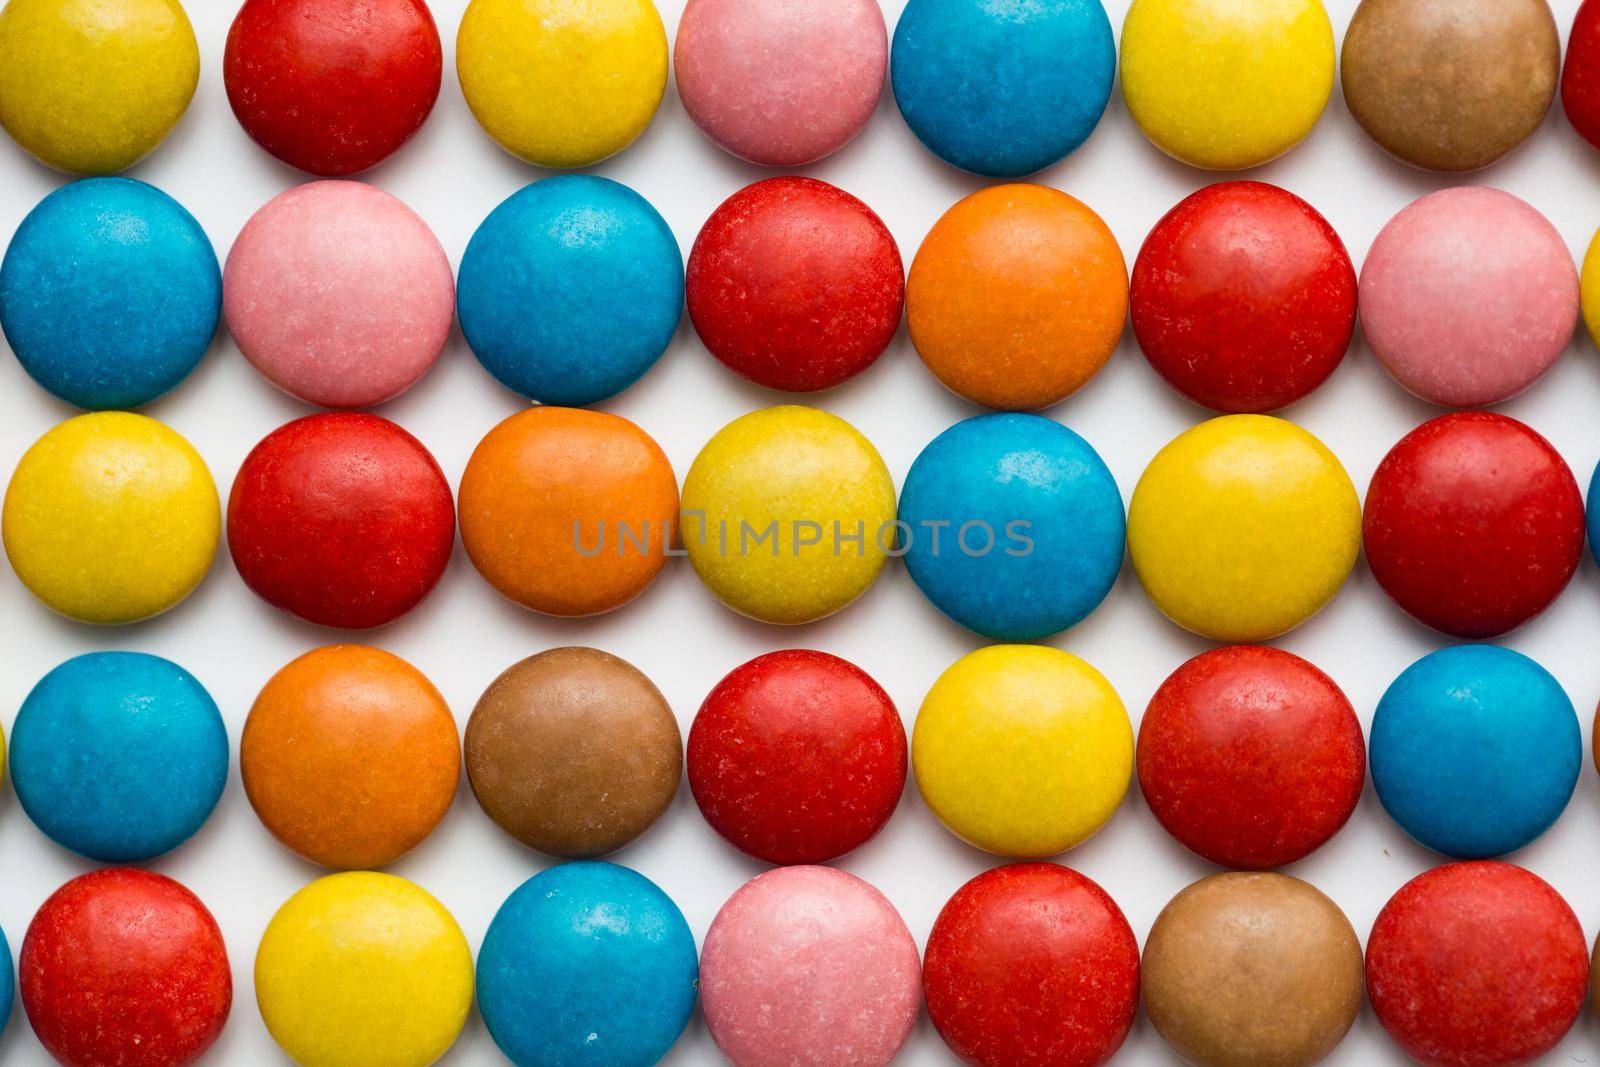 Close up of a pile of colorful chocolate coated candy, chocolate pattern, chocolate background. by StudioPeace